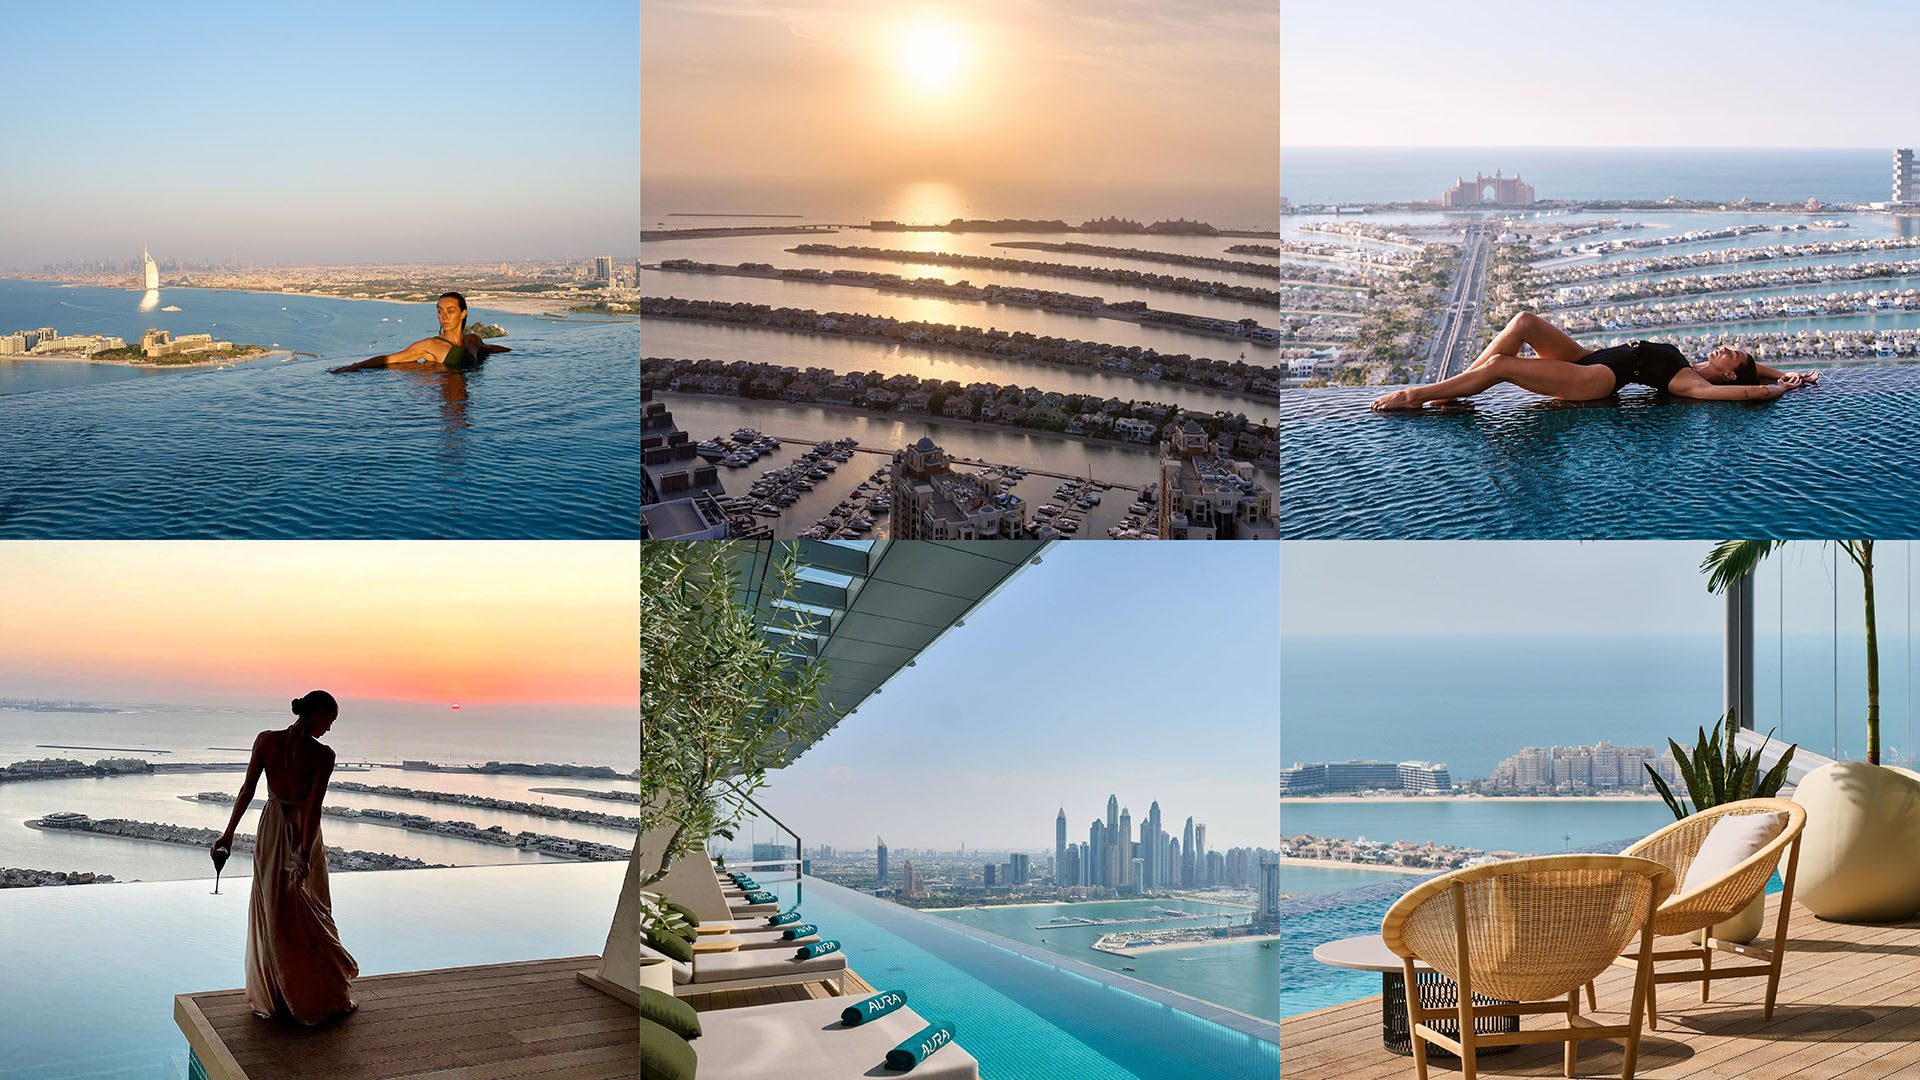 Take A Dip In The Highest Infinity Pool In Dubai With A 360 View